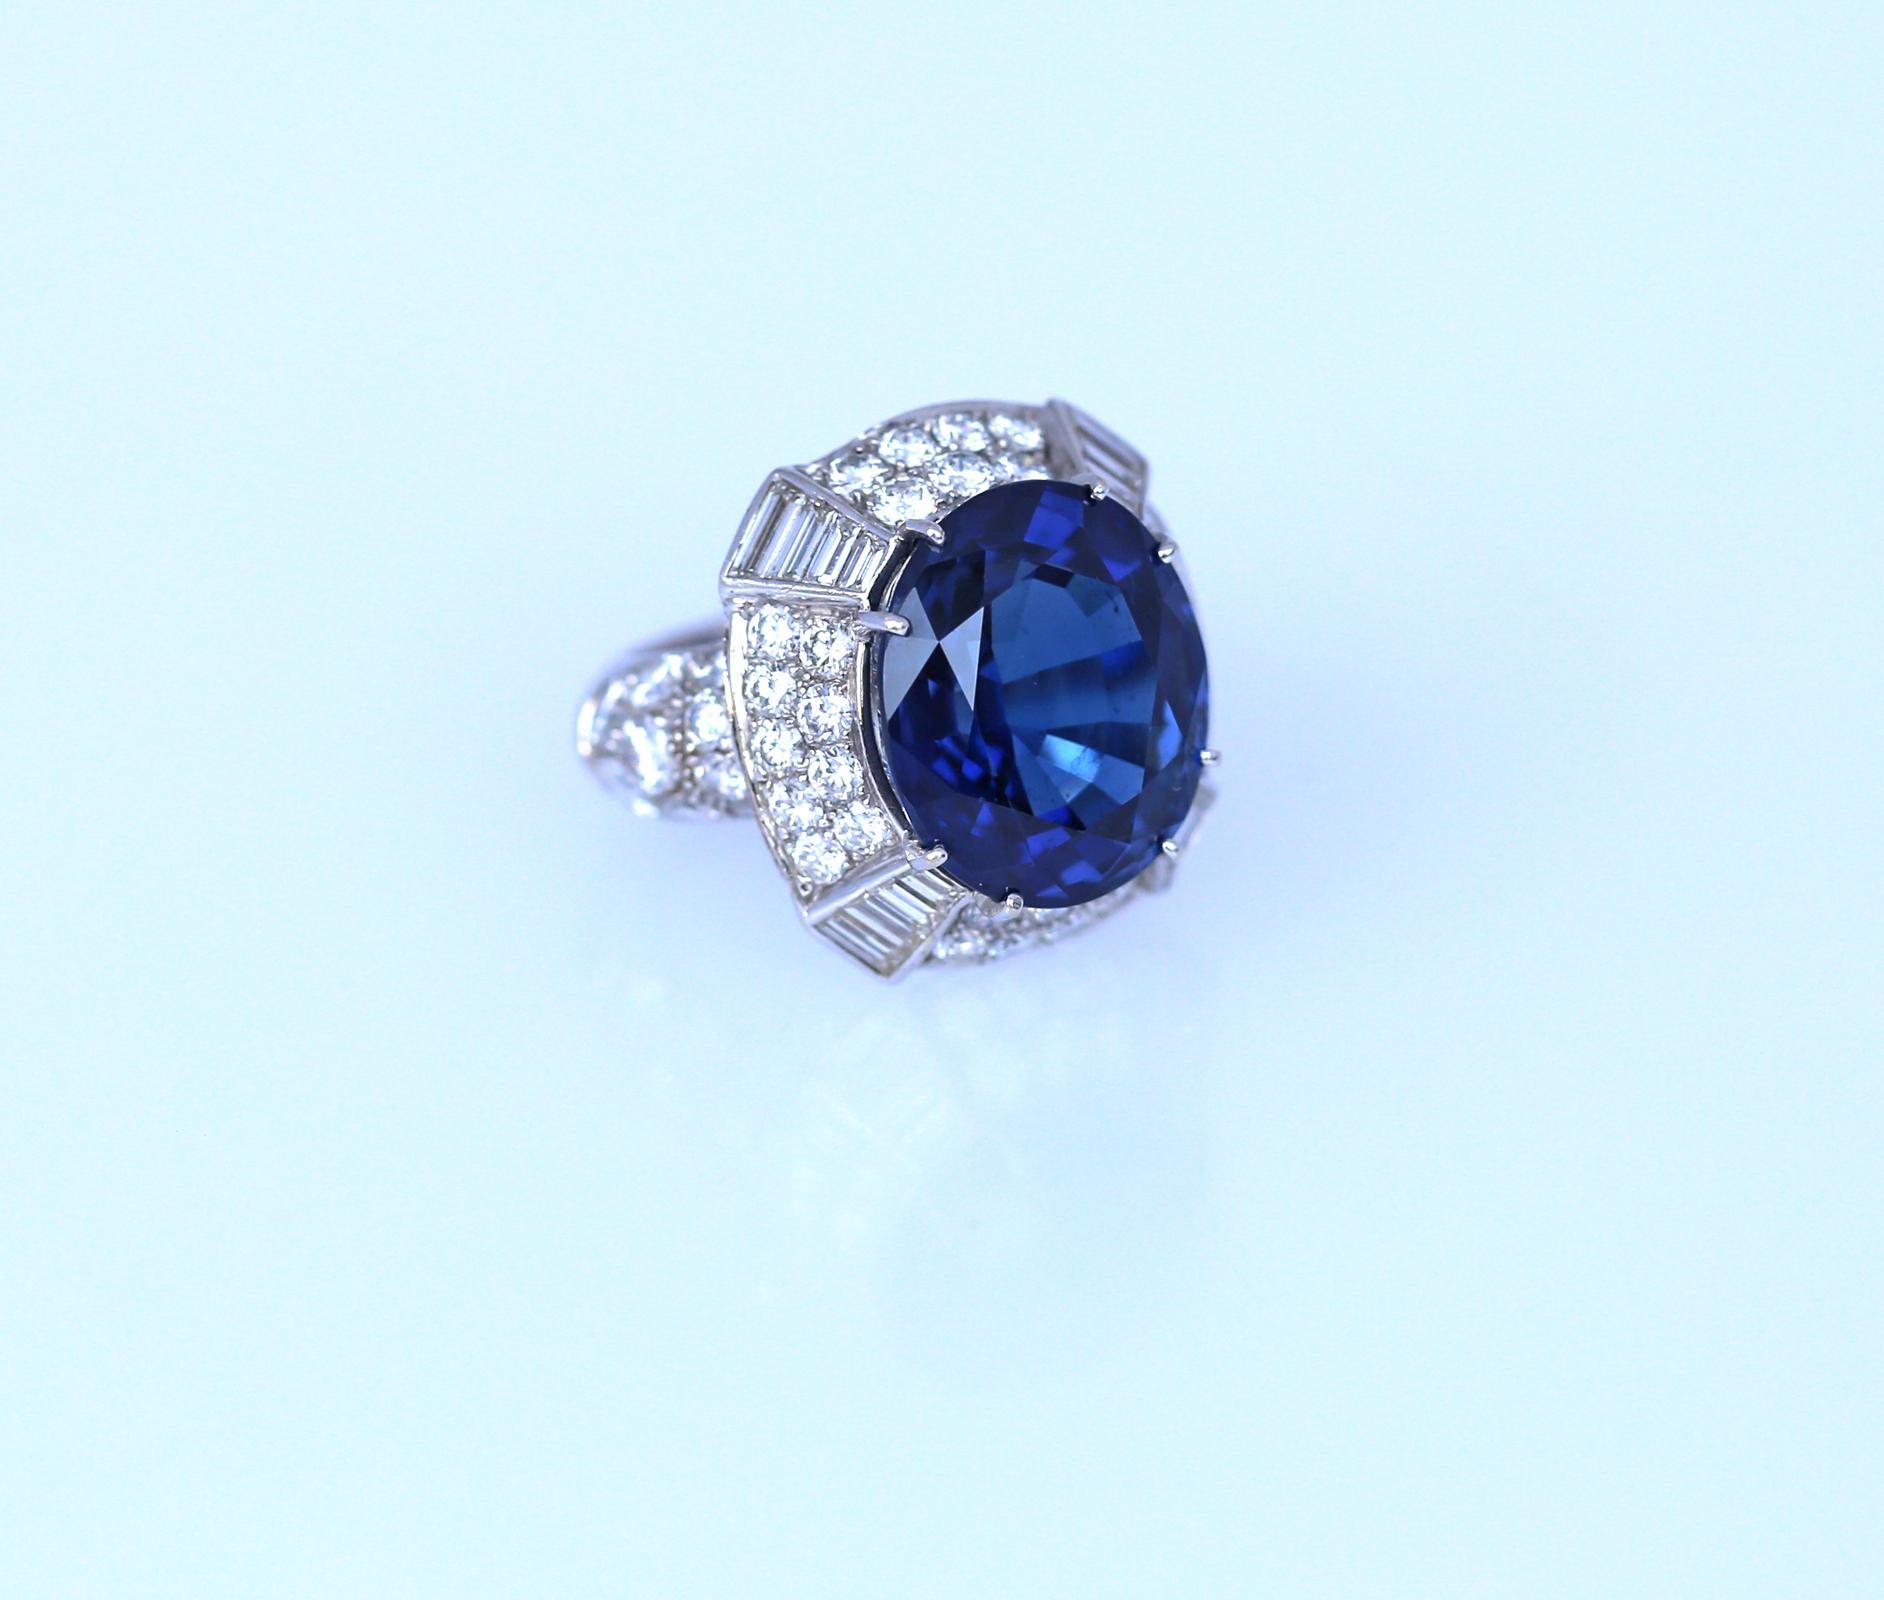 14.6 Ct Natural Sapphire Certified Diamond Ring 18K Gold, 1998 For Sale 5